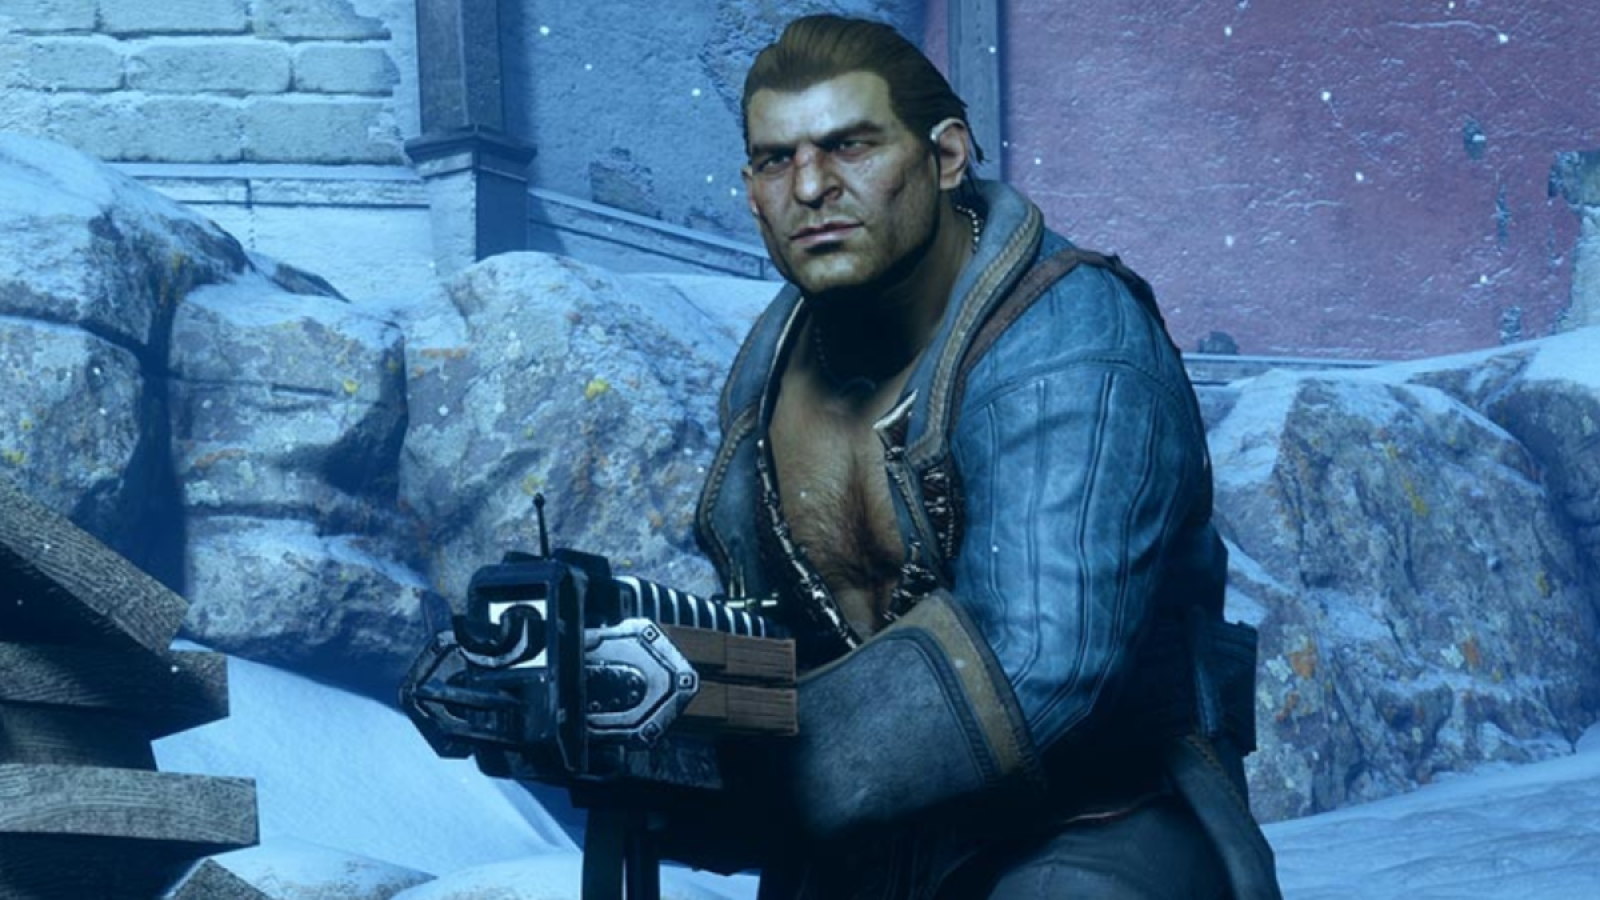 Varric in Dragon Age: Inquisition